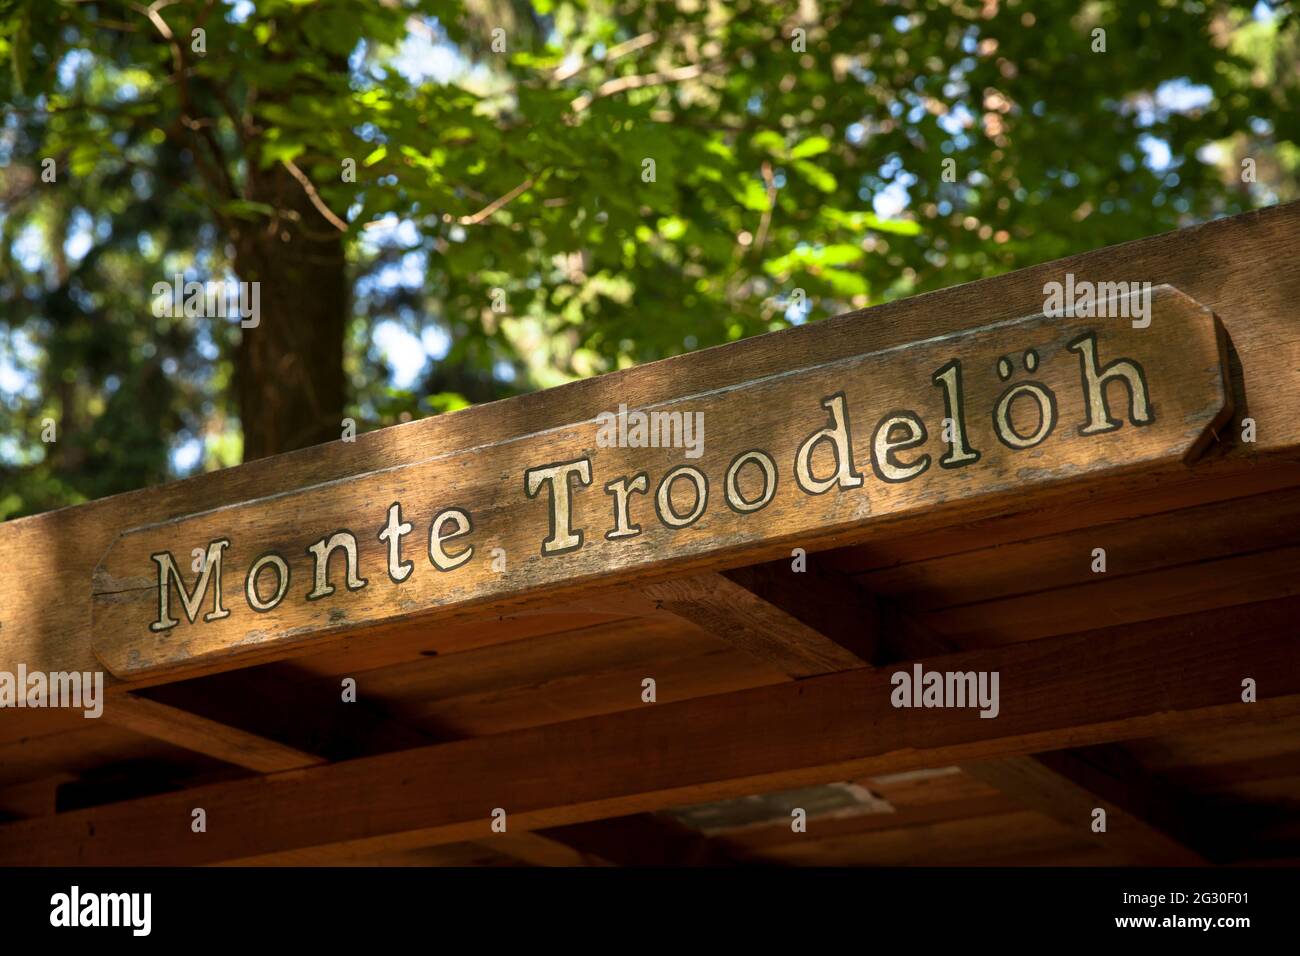 sign on a covered bench of Monte Troodeloeh in the Koenigsforest in Cologne, here is the highest natural height of the city with 118.04 m above sea le Stock Photo